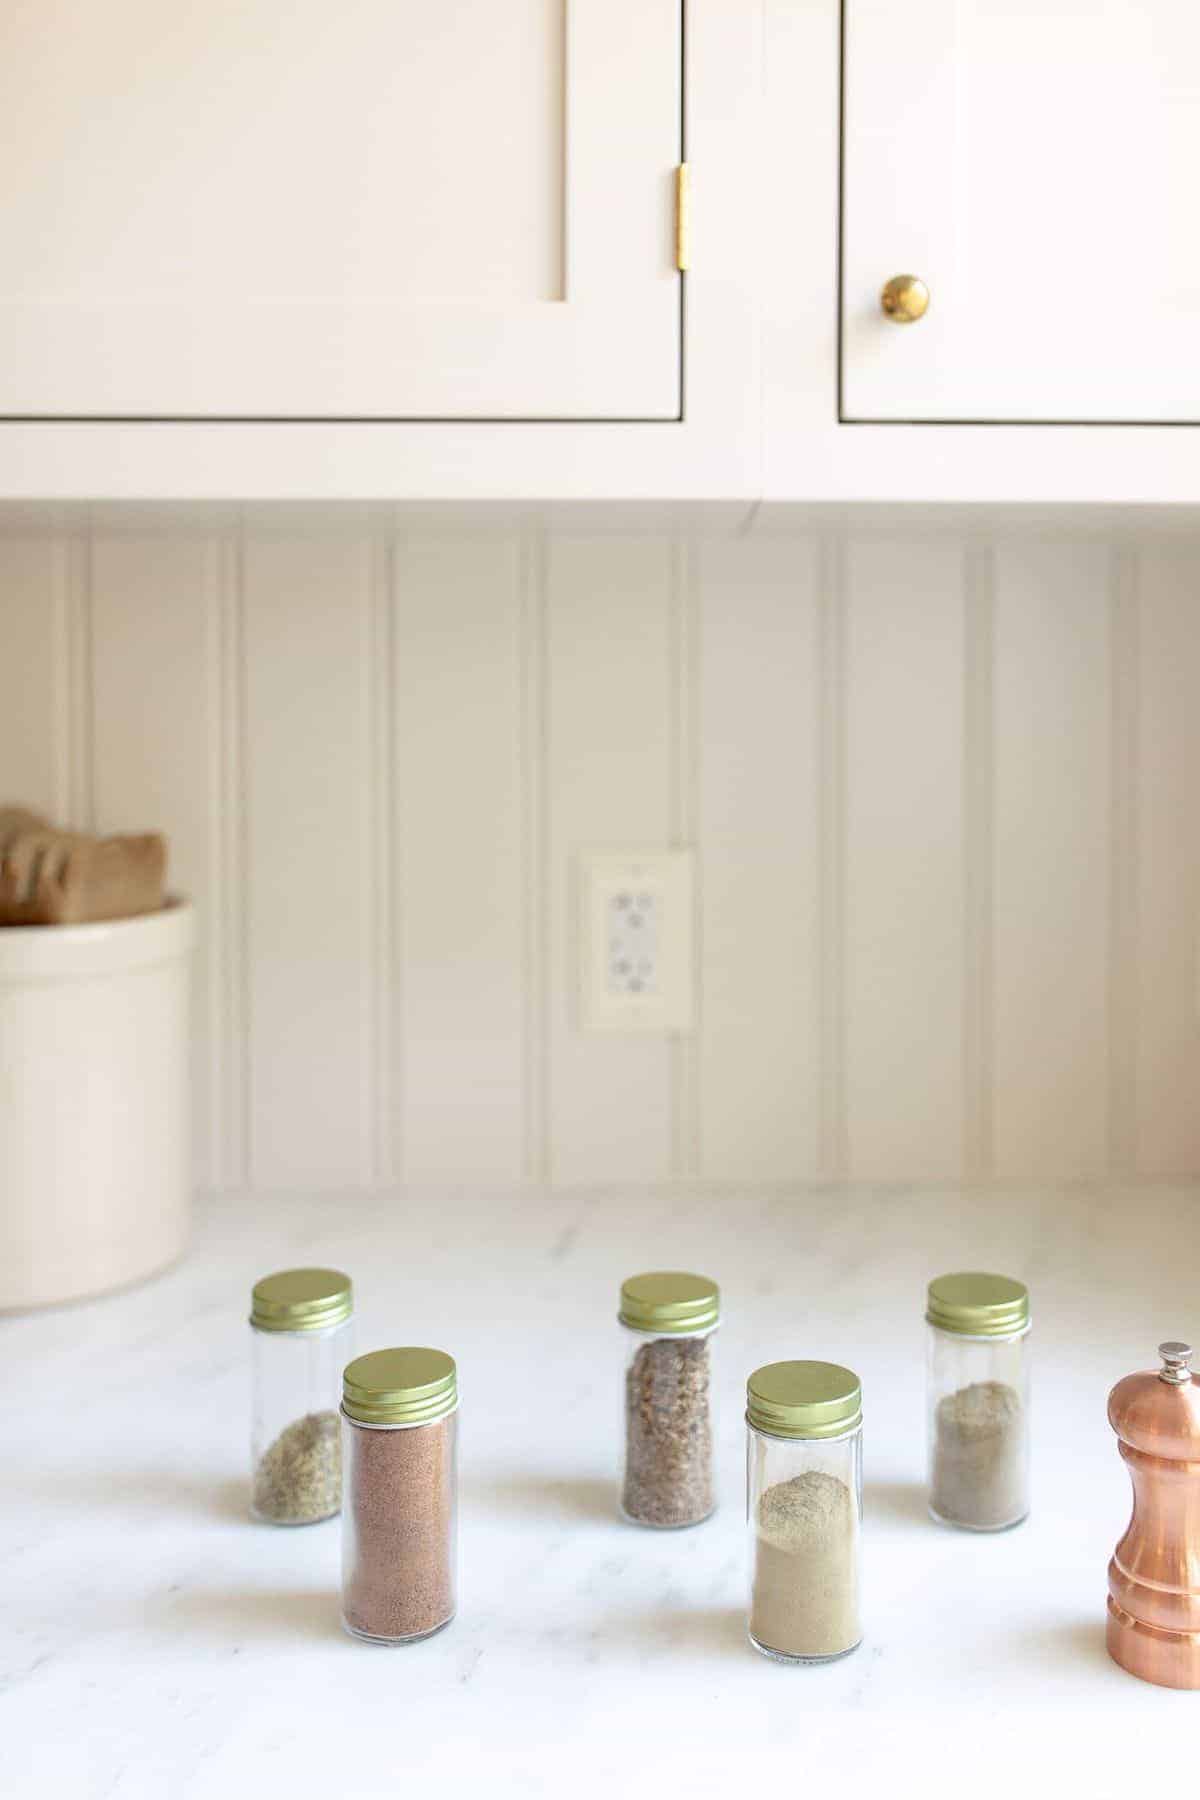 White kitchen with jars of spices in a row for poultry seasoning mix.